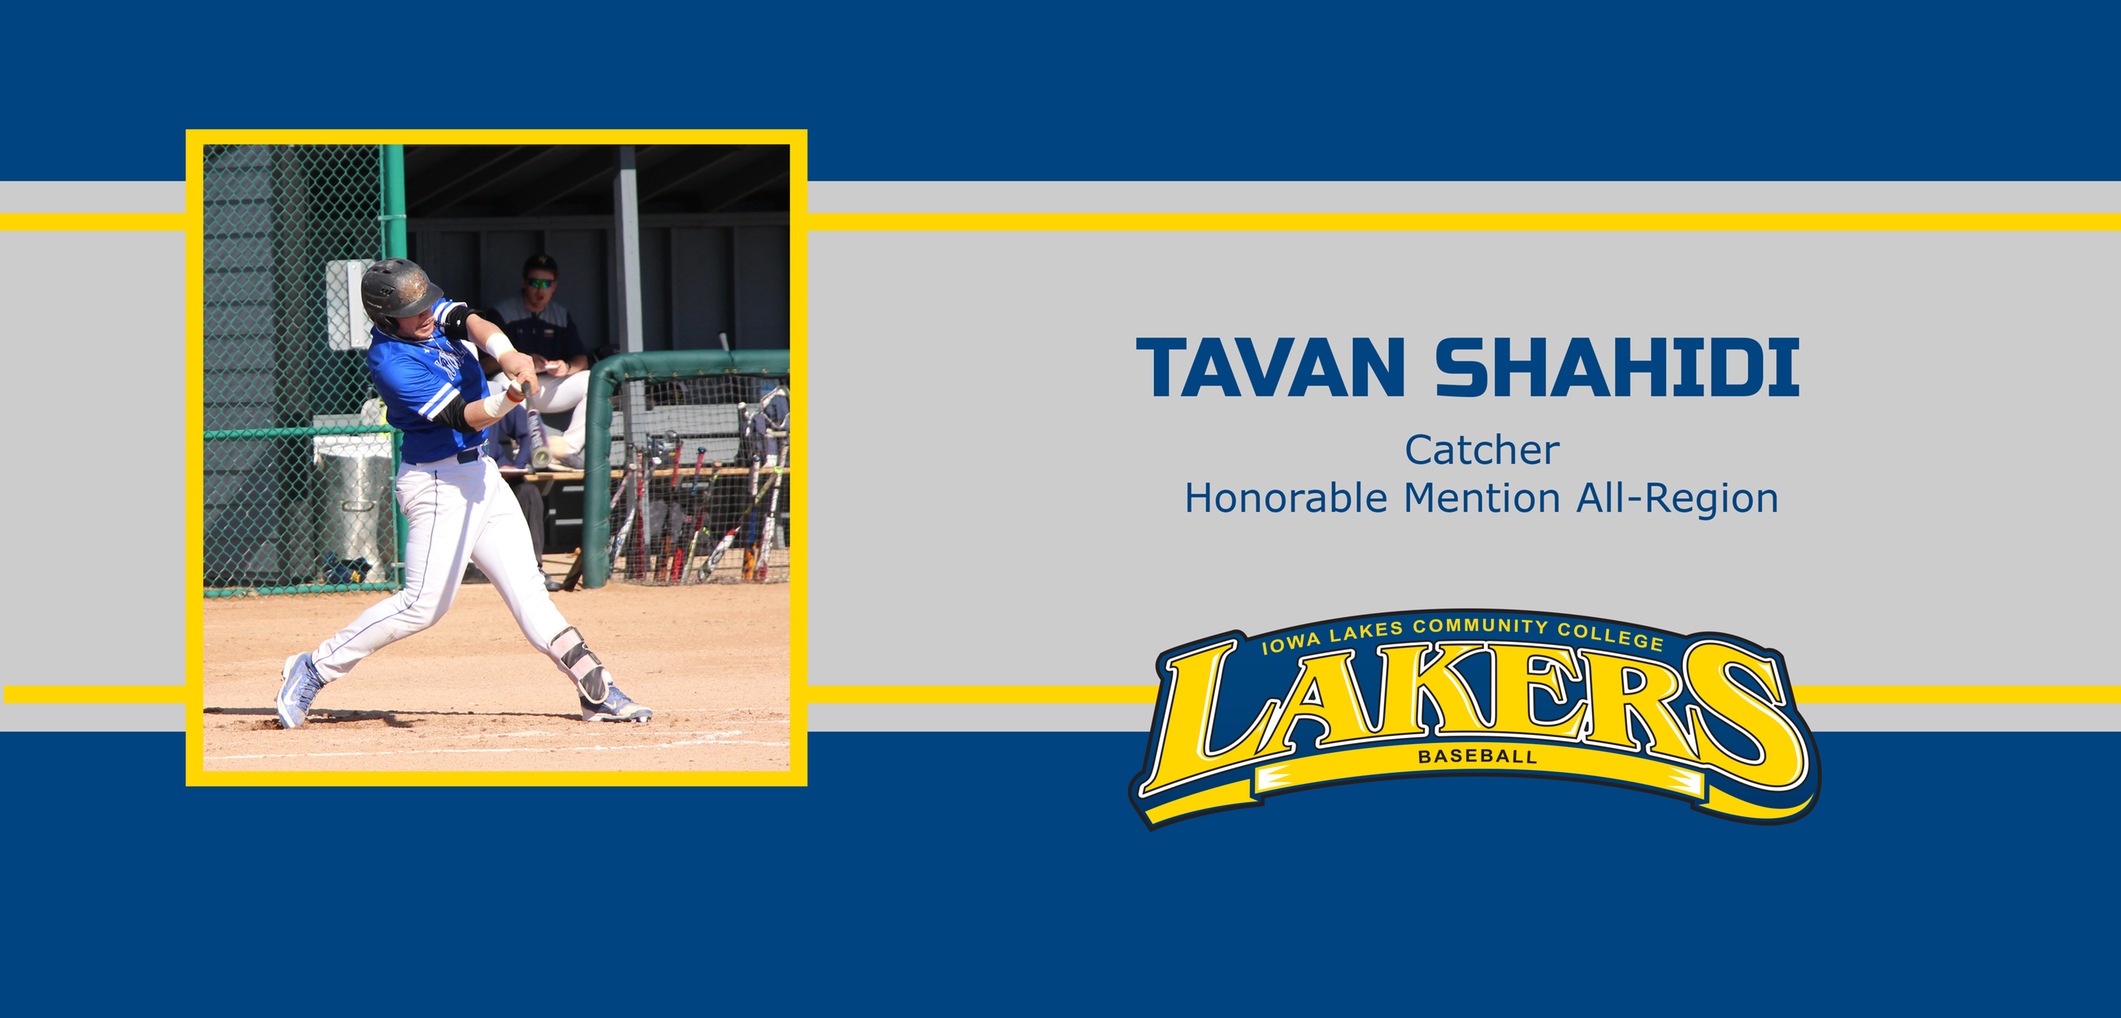 Shahidi Receives All-Region Honorable Mention